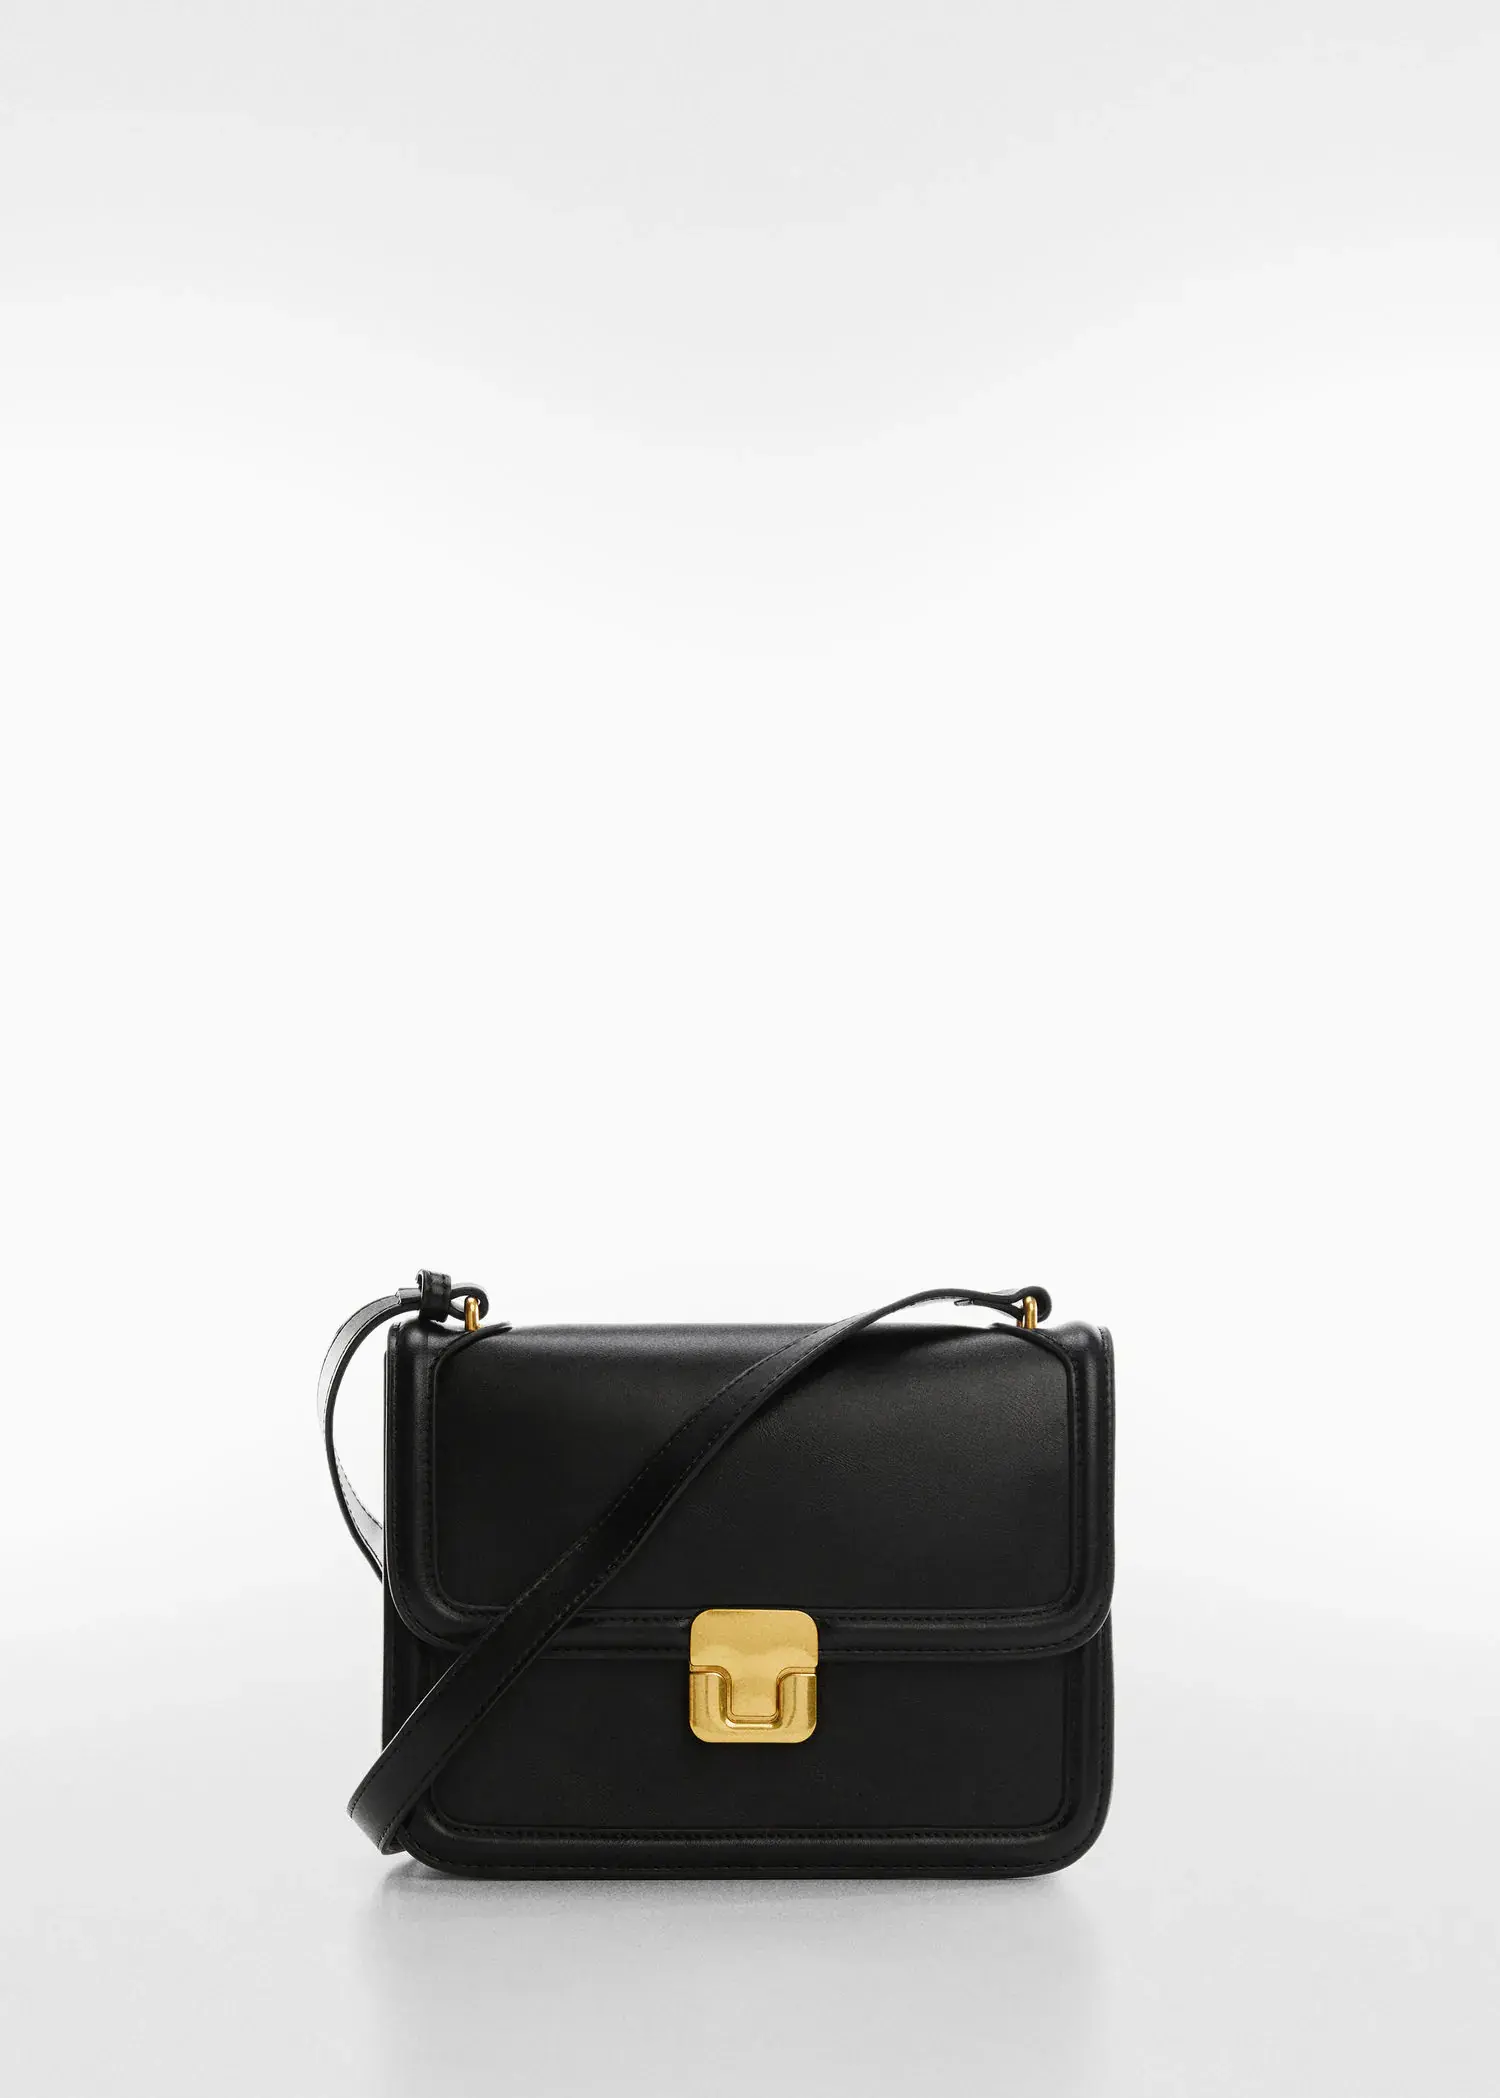 Mango Cross-body bag. a black leather bag with a gold clasp. 